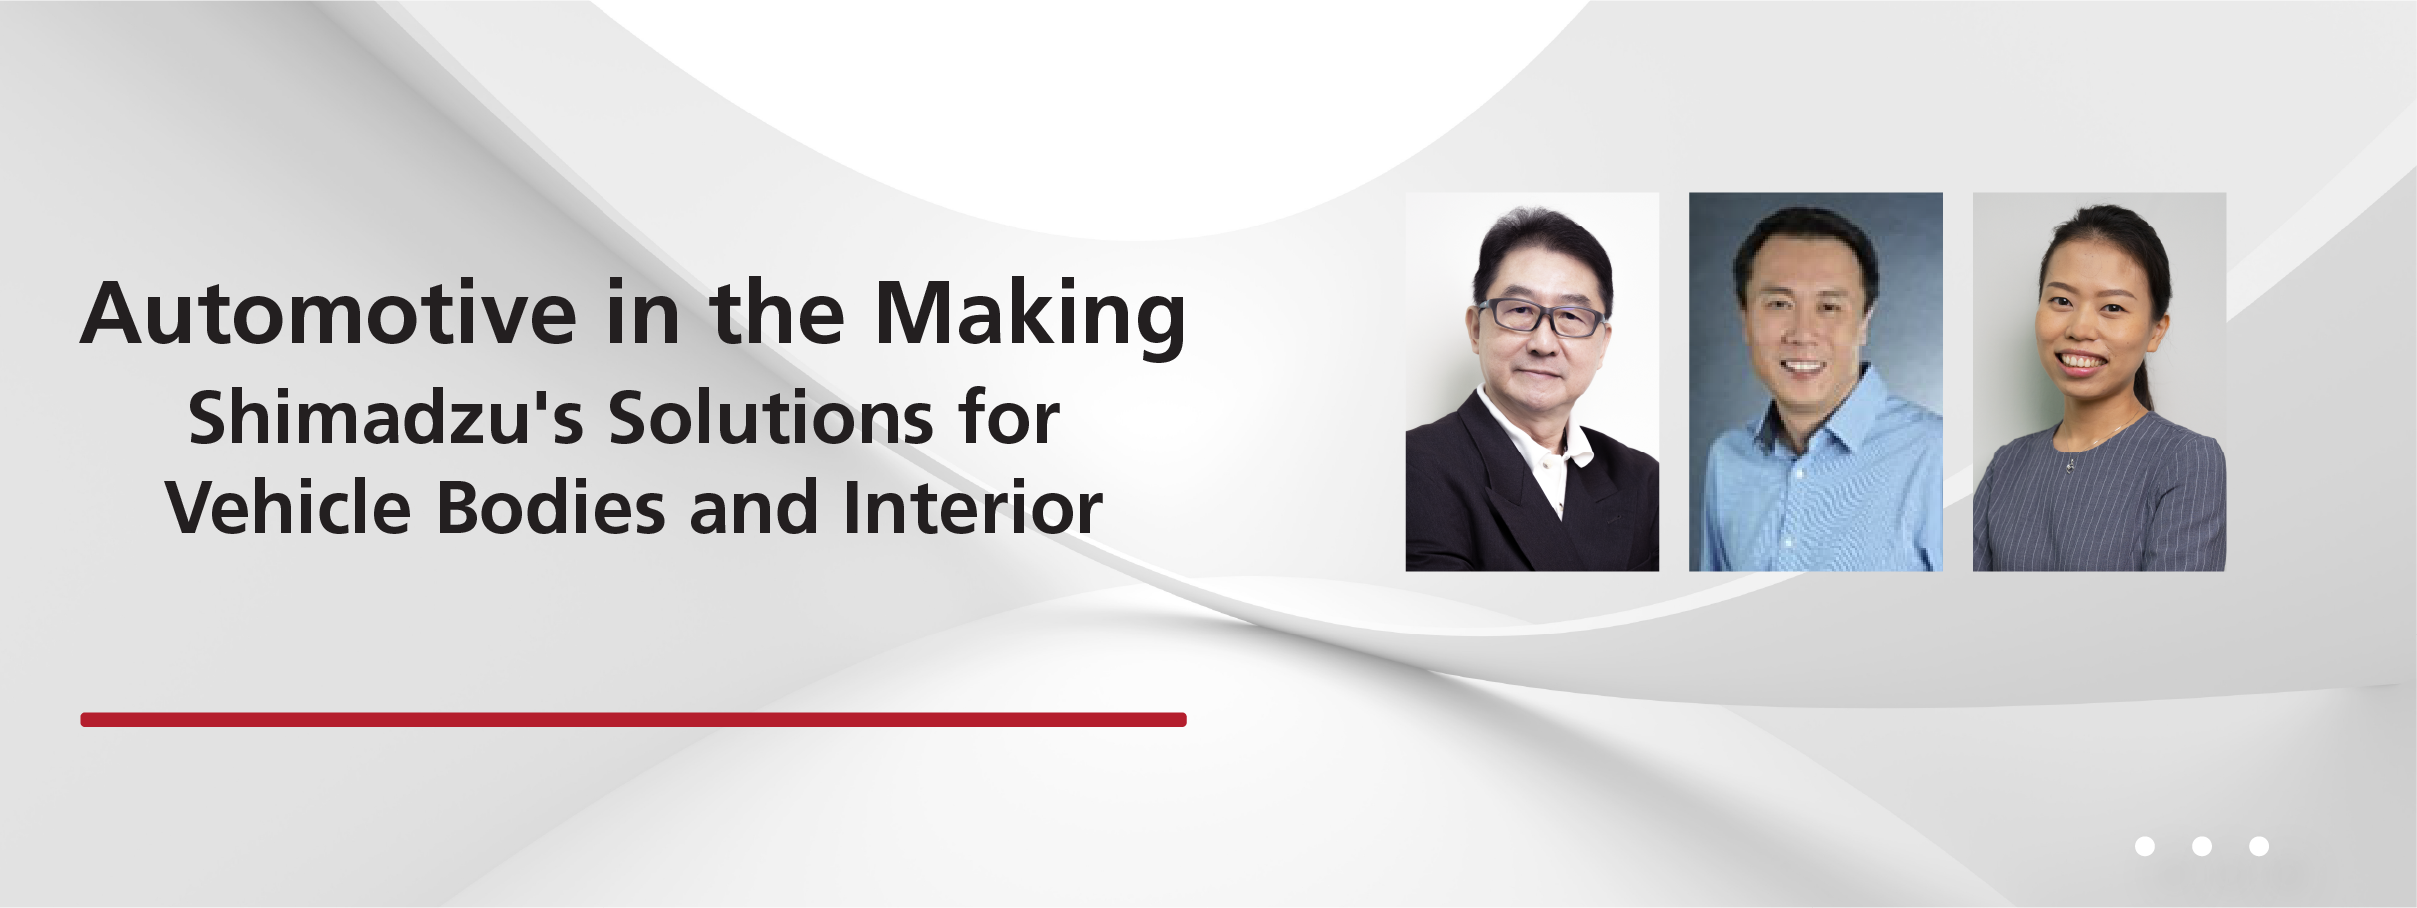 Automotive in the Making, Shimadzu's Solutions for Vehicle Bodies and Interior